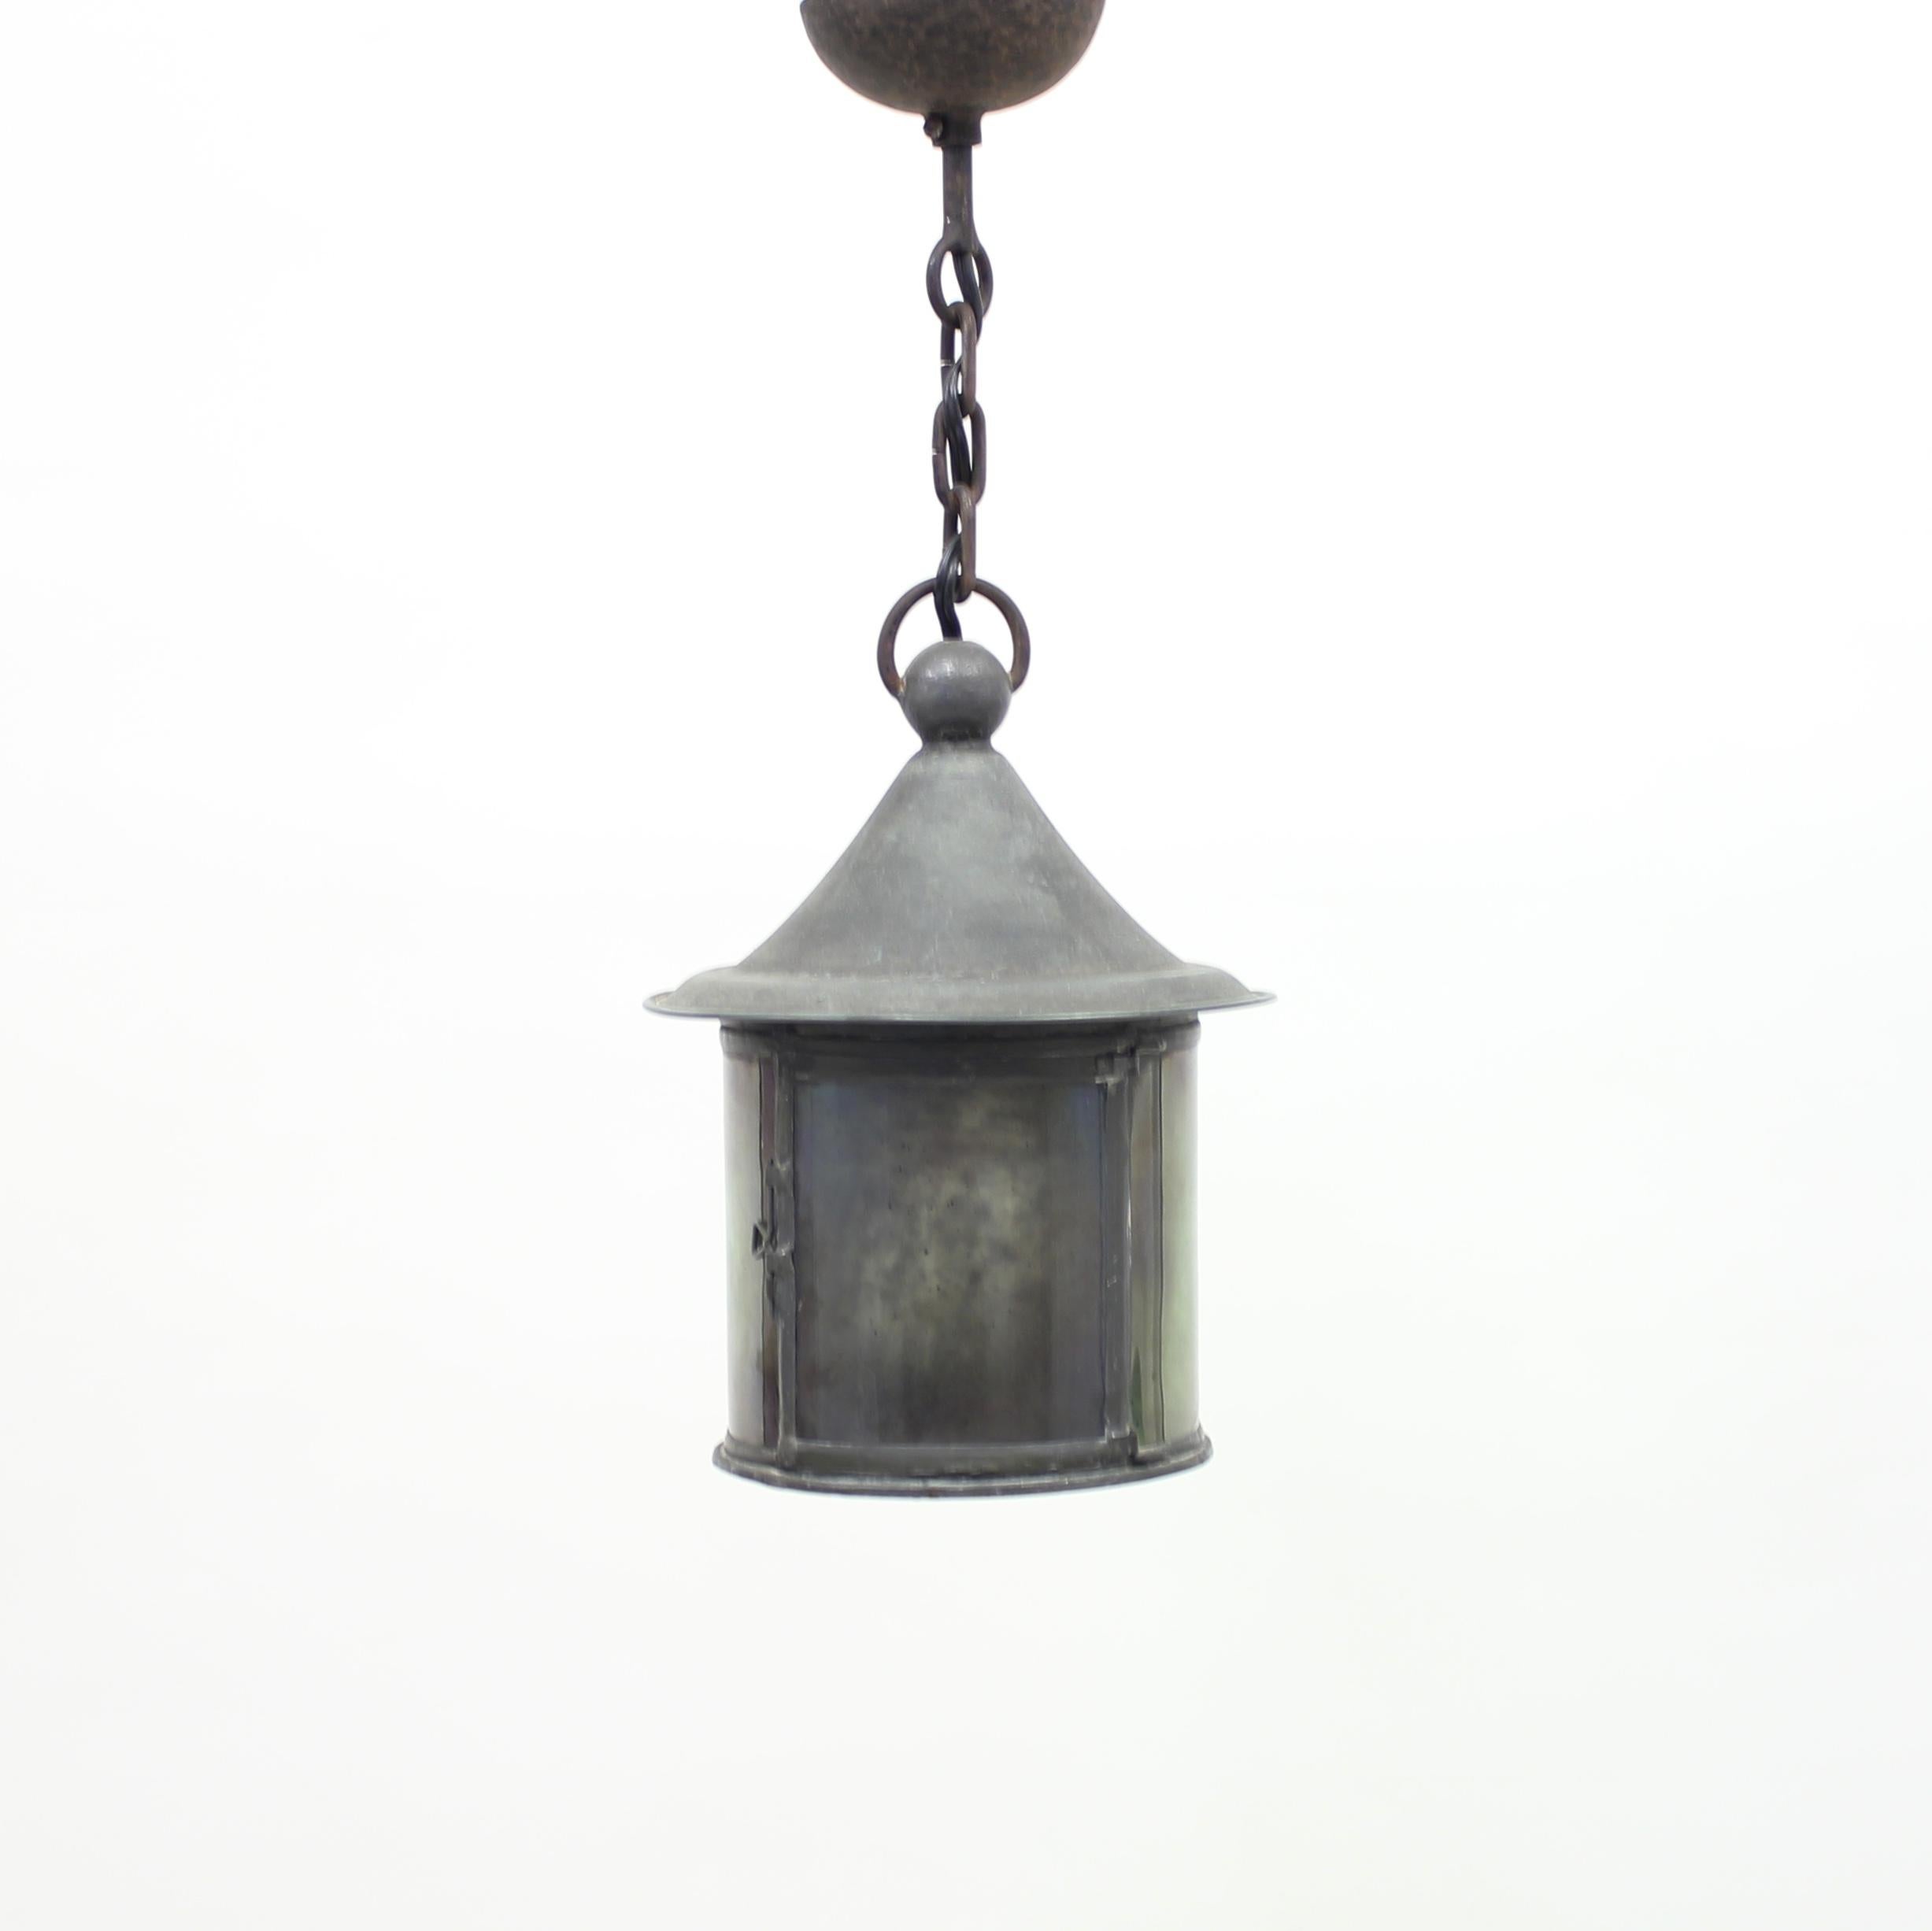 Arts & Crafts electrified lantern in glass and iron, early 20th century. This lantern was originally in use at Uppsala Slott (The castle of Uppsala) in Sweden. The castle is still a landmark in Uppsala which is the forth biggest city in Swedens. The